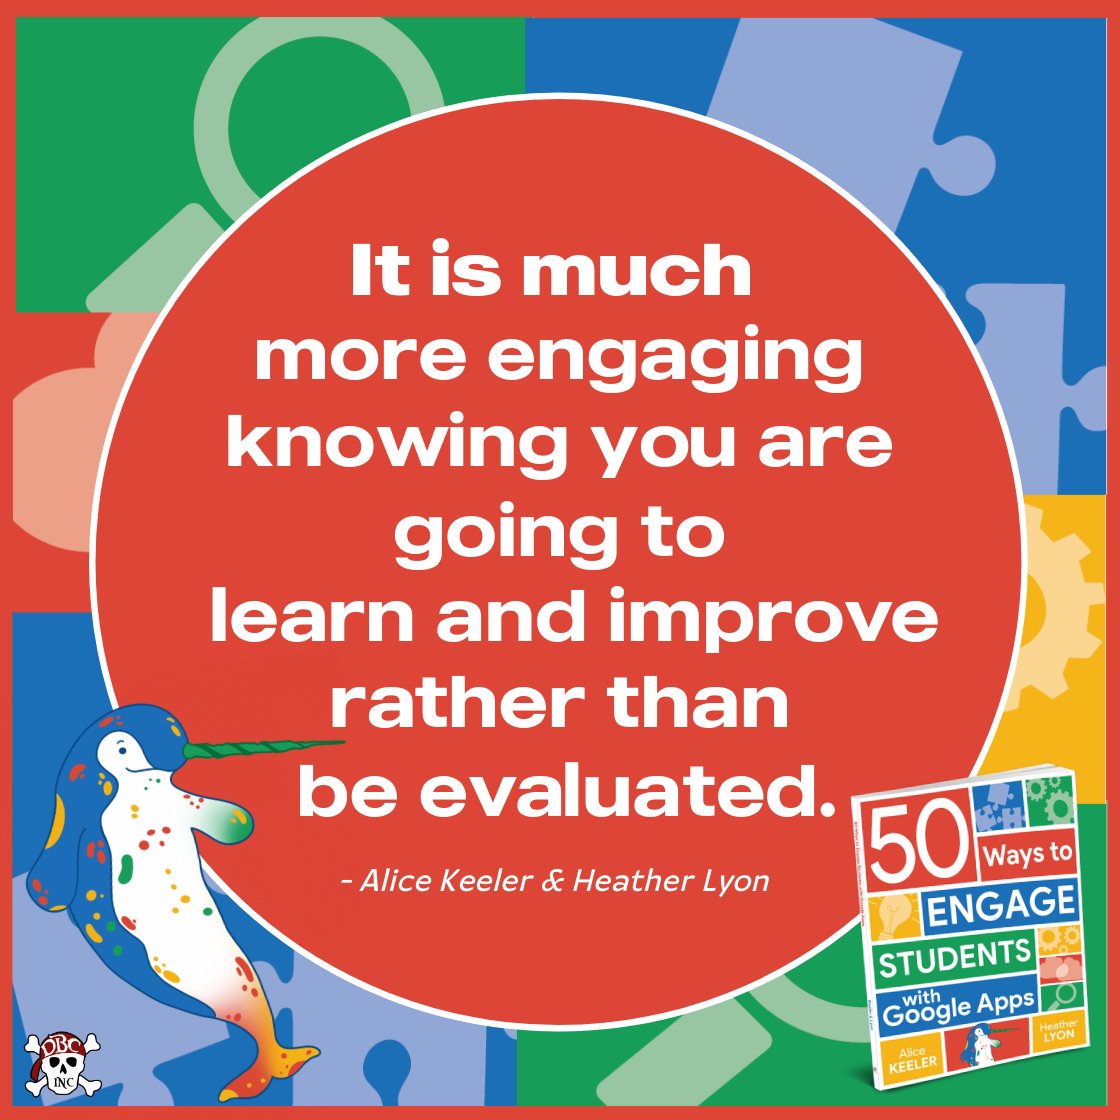 Have you checked out our new Google Apps book by Alice Keeler & Heather Lyon? Do so right HERE: 50 Ways to Engage Students with Google Apps! 📖 amazon.com/Ways-Engage-St… #tlap #dbcincbooks @burgessdave @TaraMartinEDU @alicekeeler @LyonsLetters